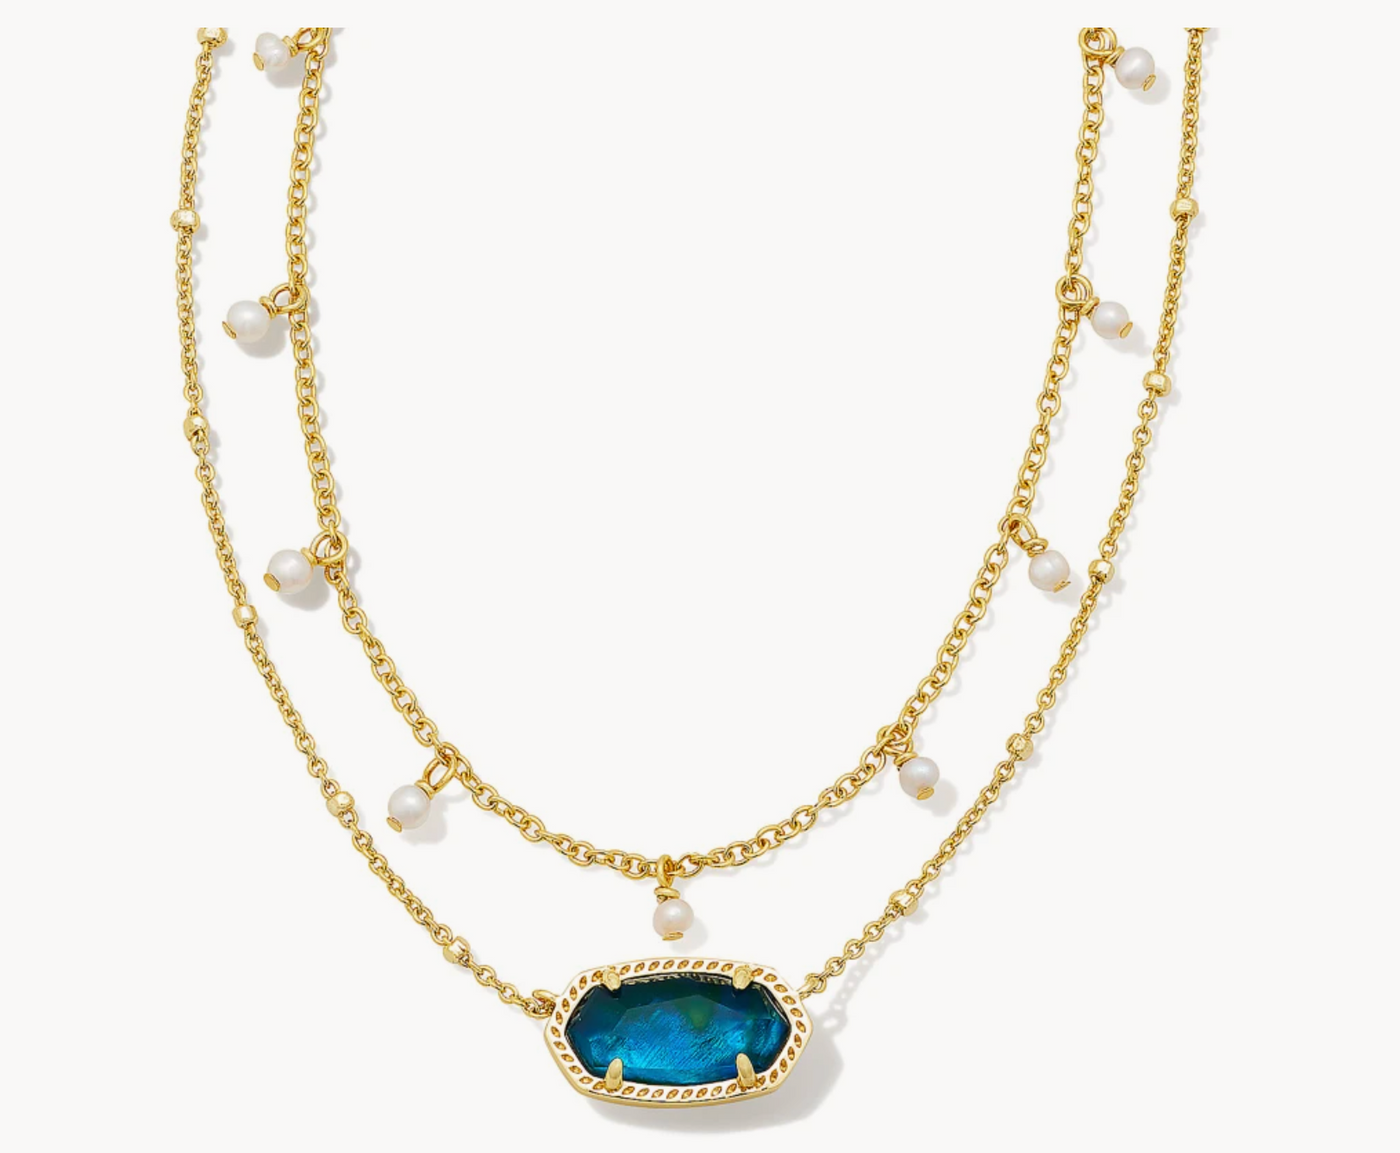 Kendra Scott Elisa Gold Pearl Multi Strand Necklace in Teal Abalone